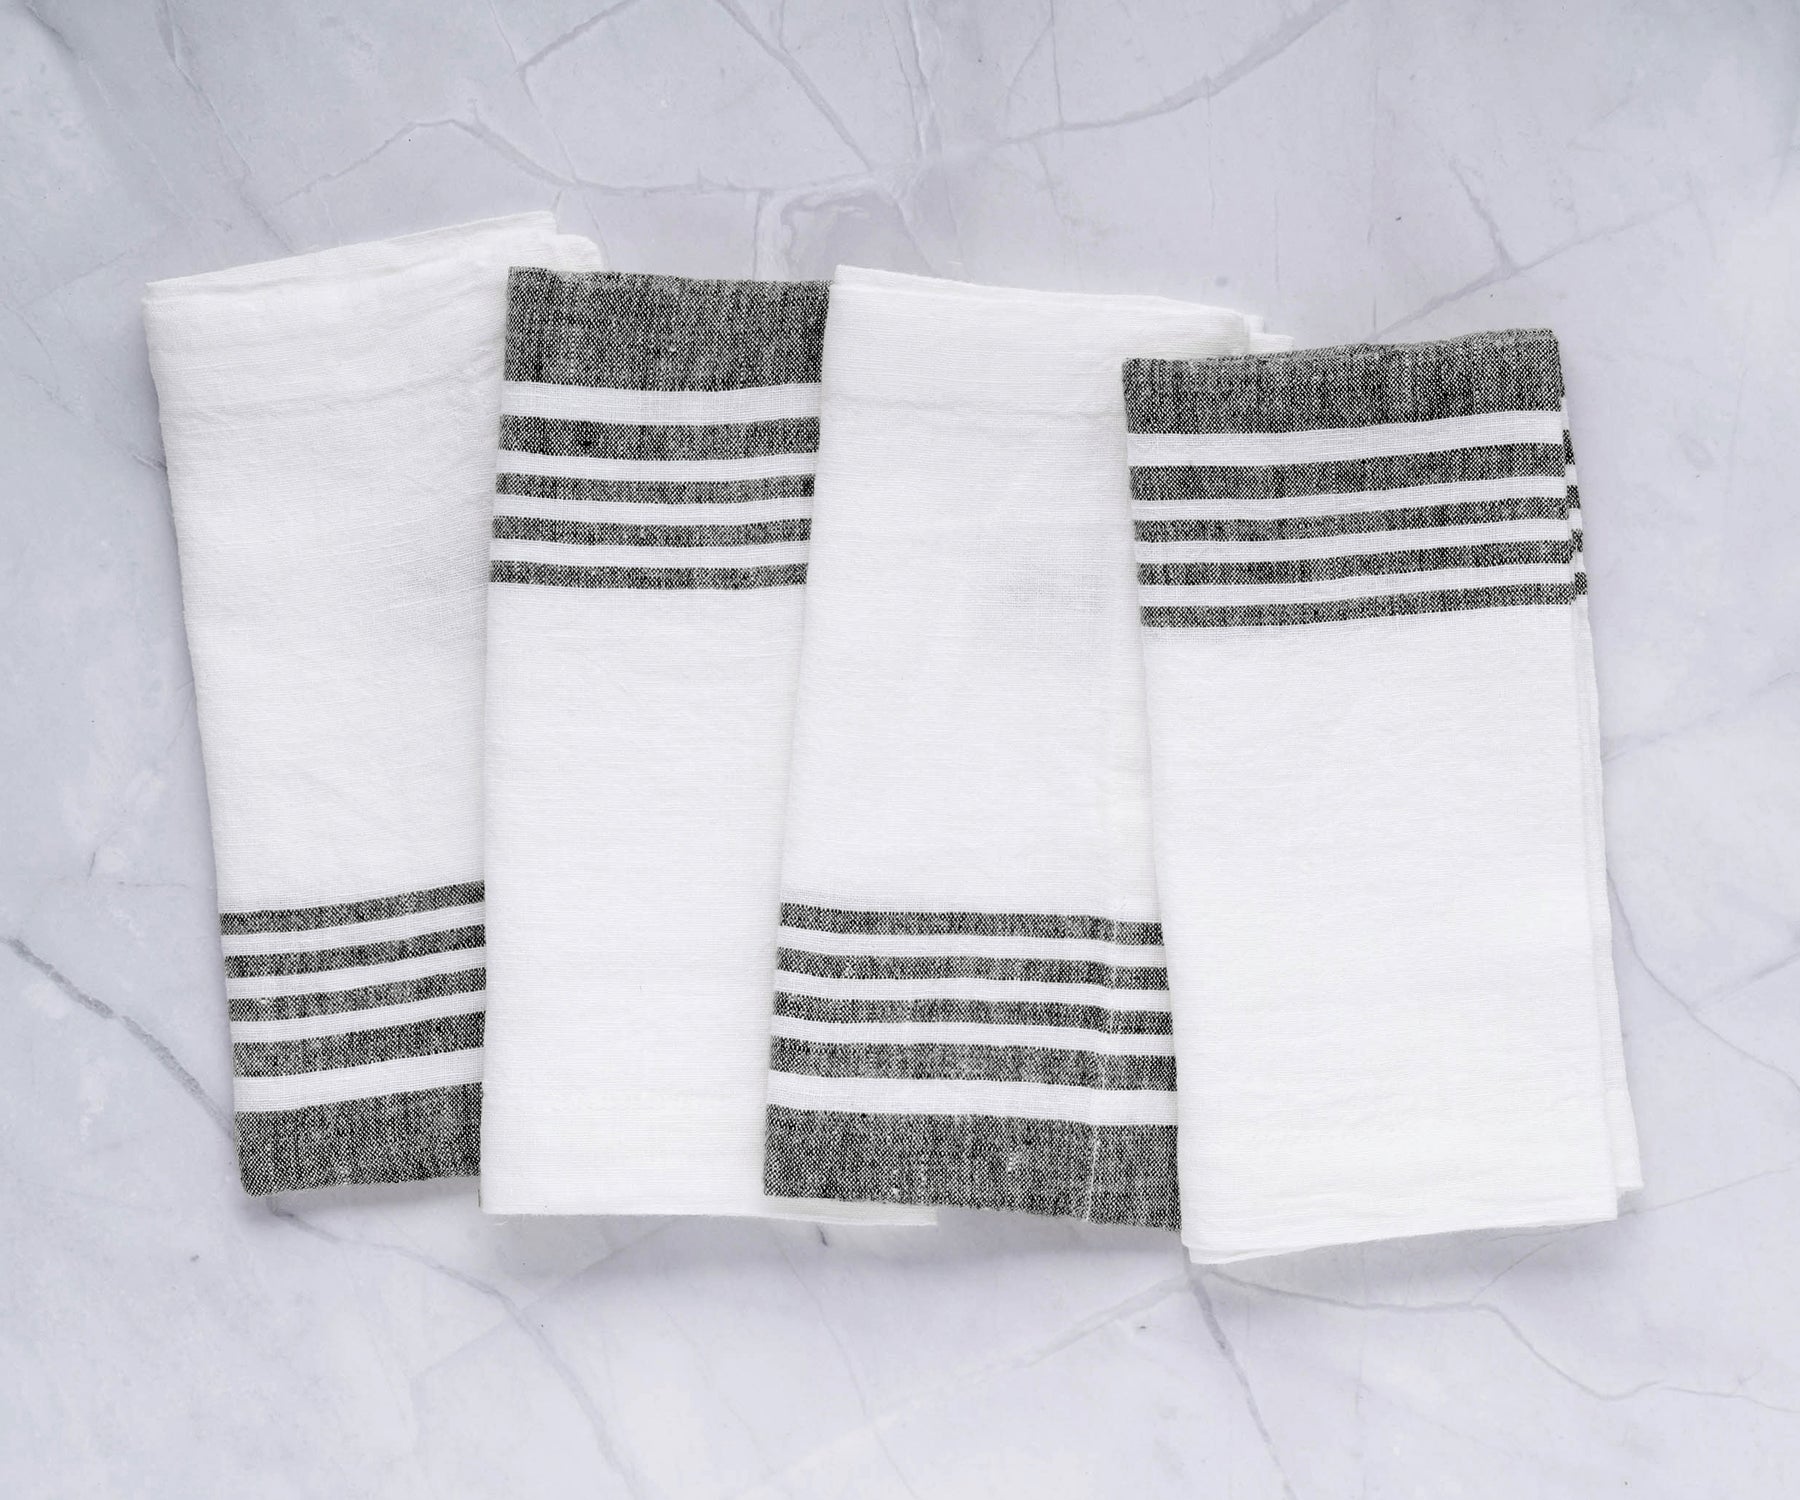 Bistro Stripe napkins can add a vibrant and decorative touch to table settings, complementing the overall aesthetic and enhancing the visual appeal of the dining area.